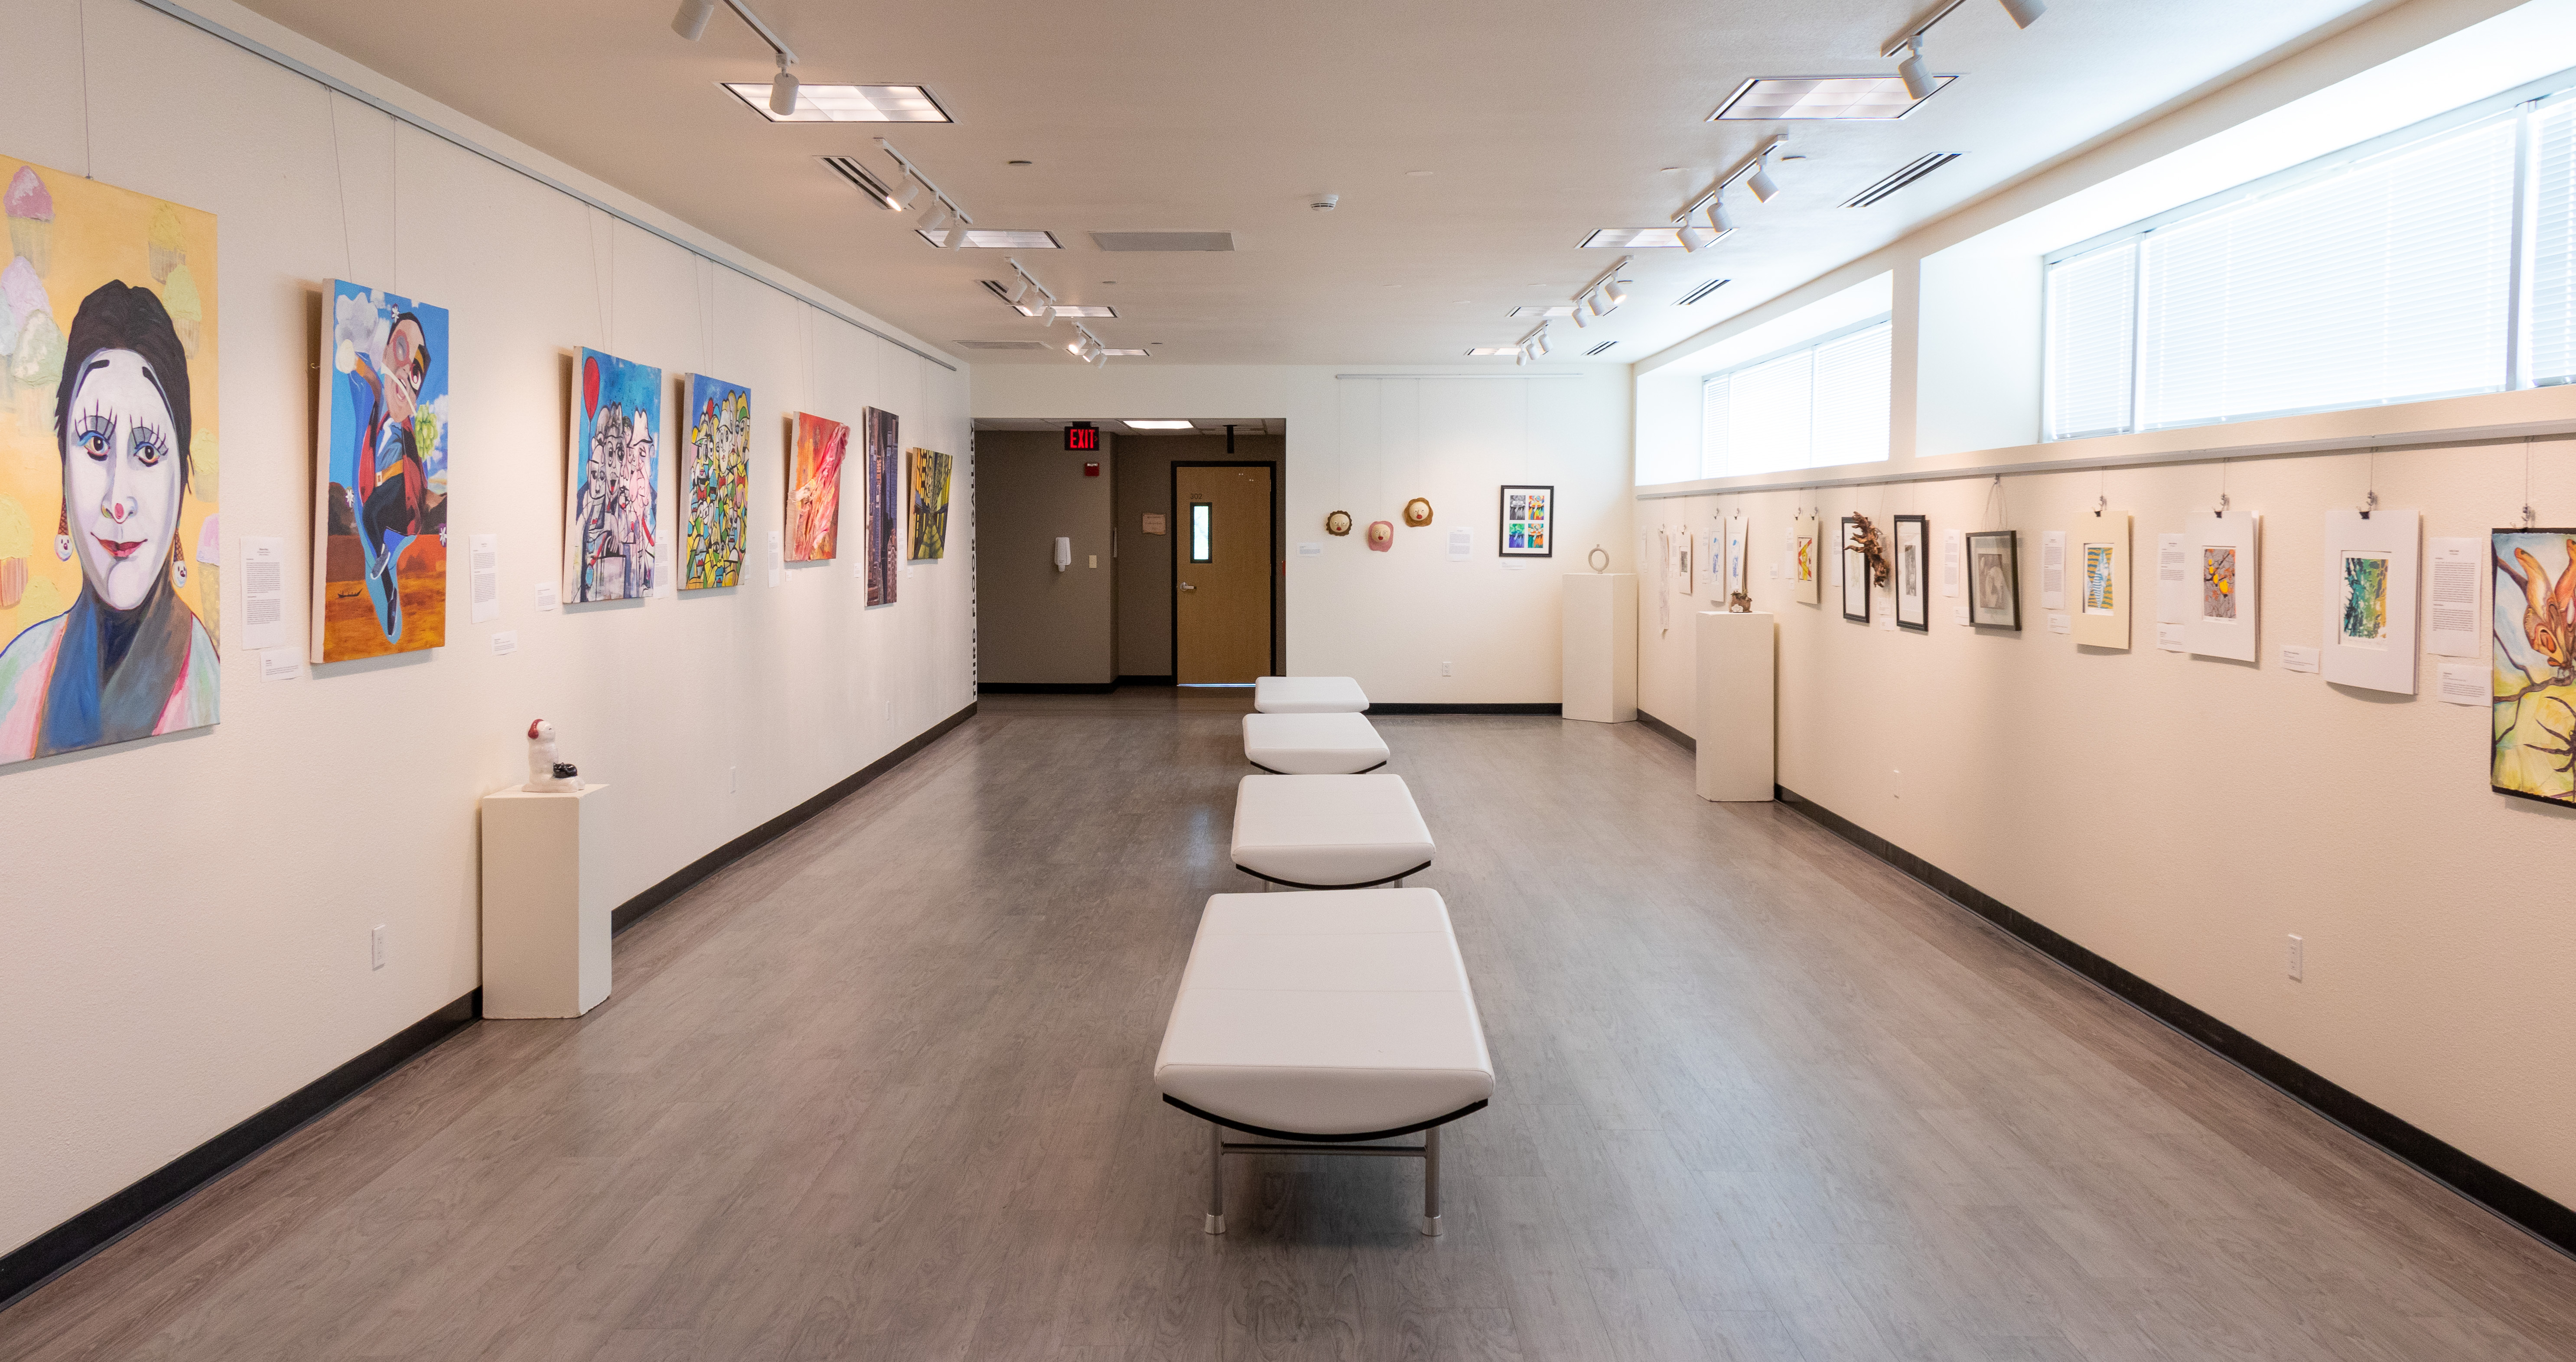 Photo of the Third Floor Gallery in the Bell Memorial Union